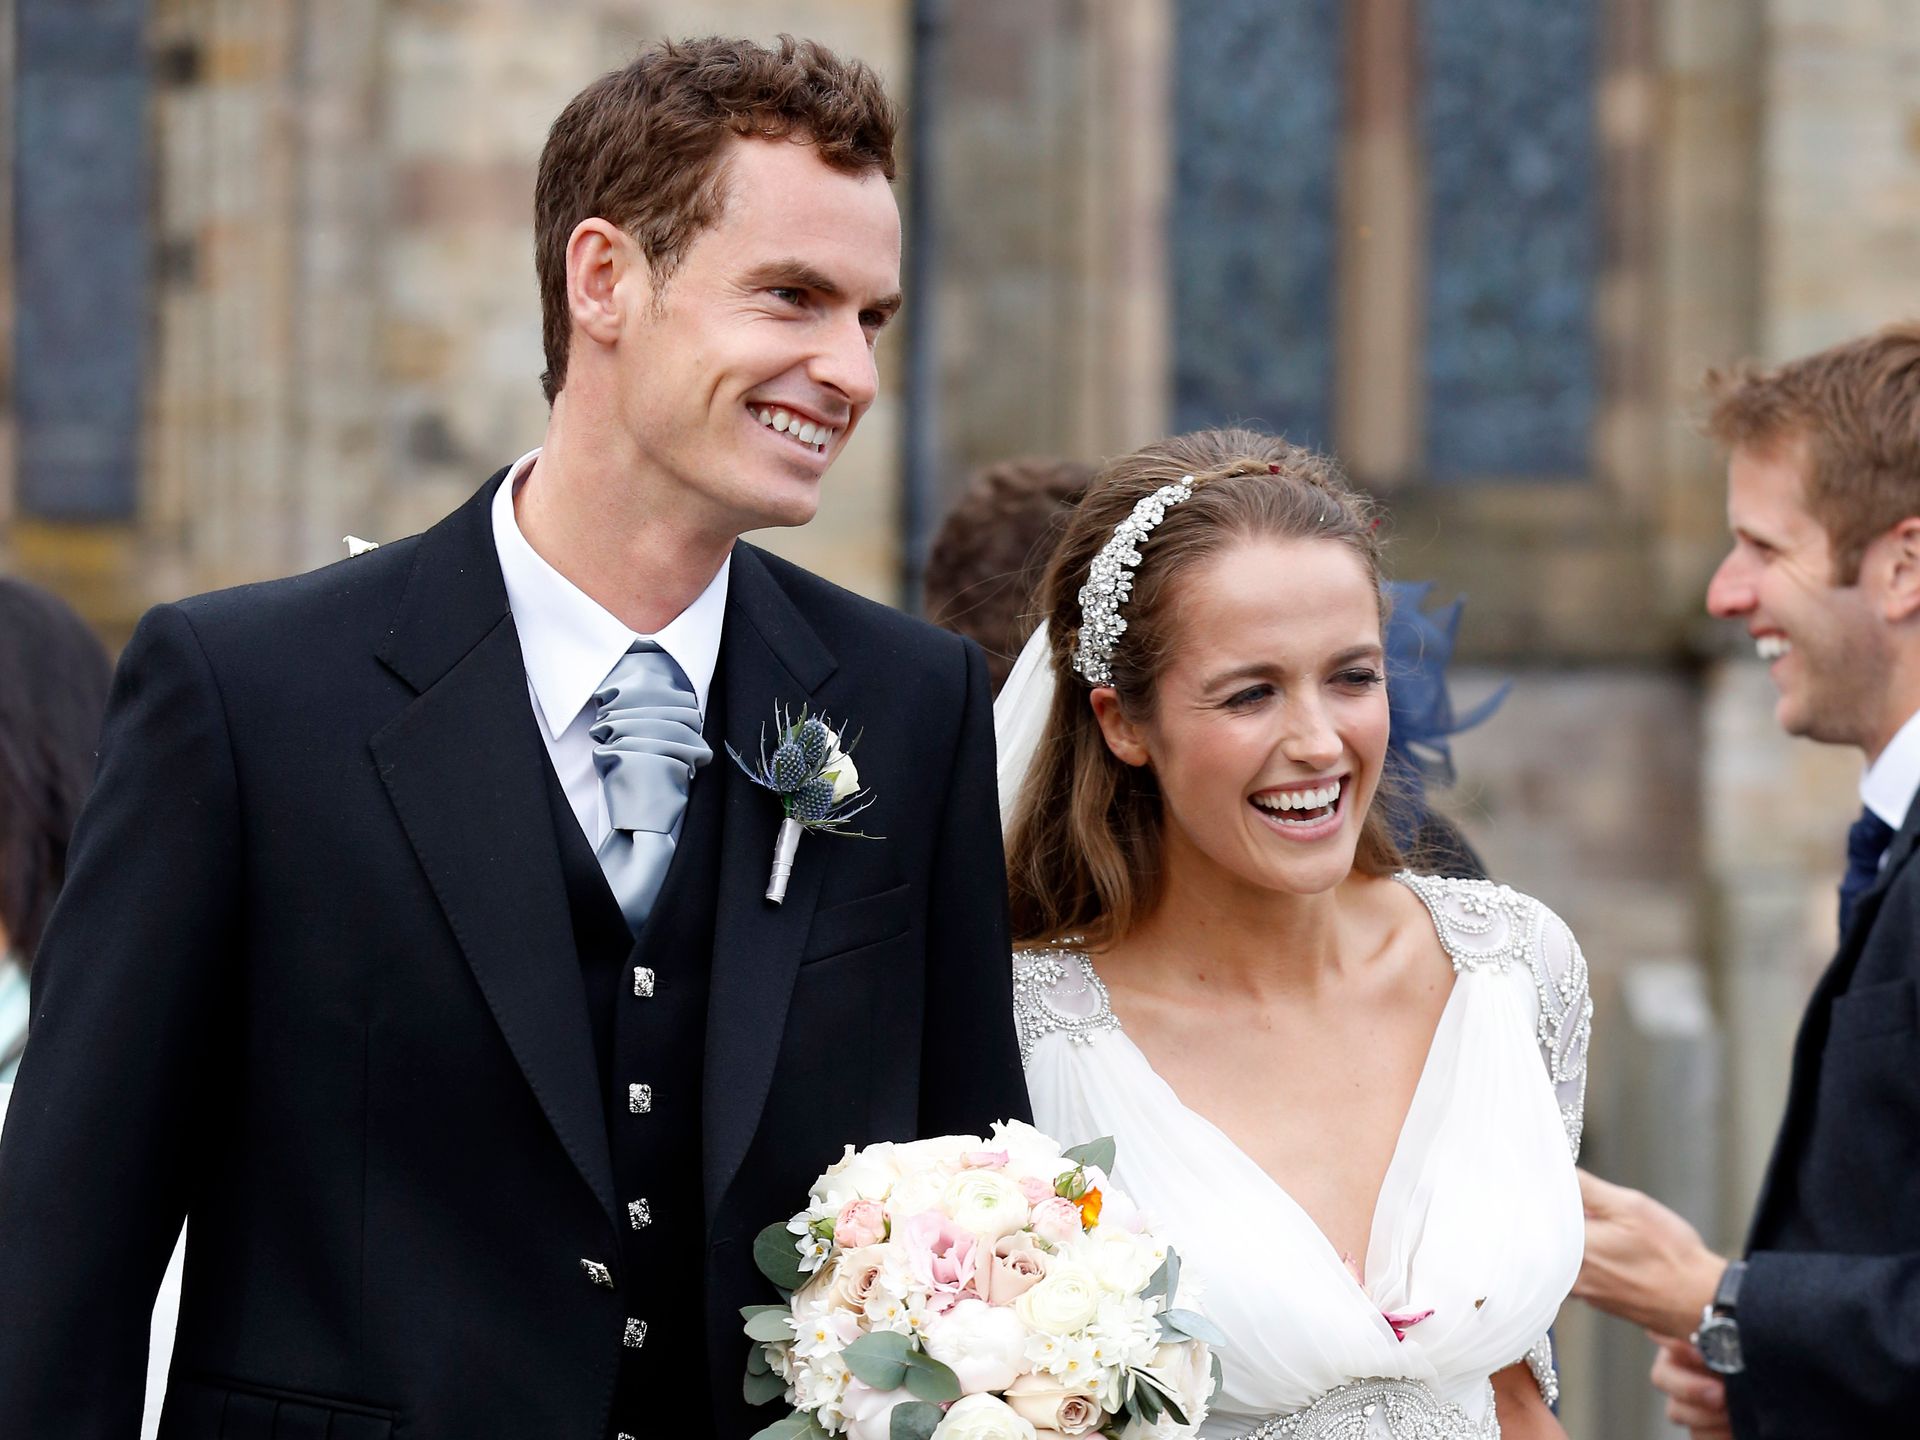 Andy Murray's glowing bride Kim's wedding hair was perfection - here's how  to recreate it